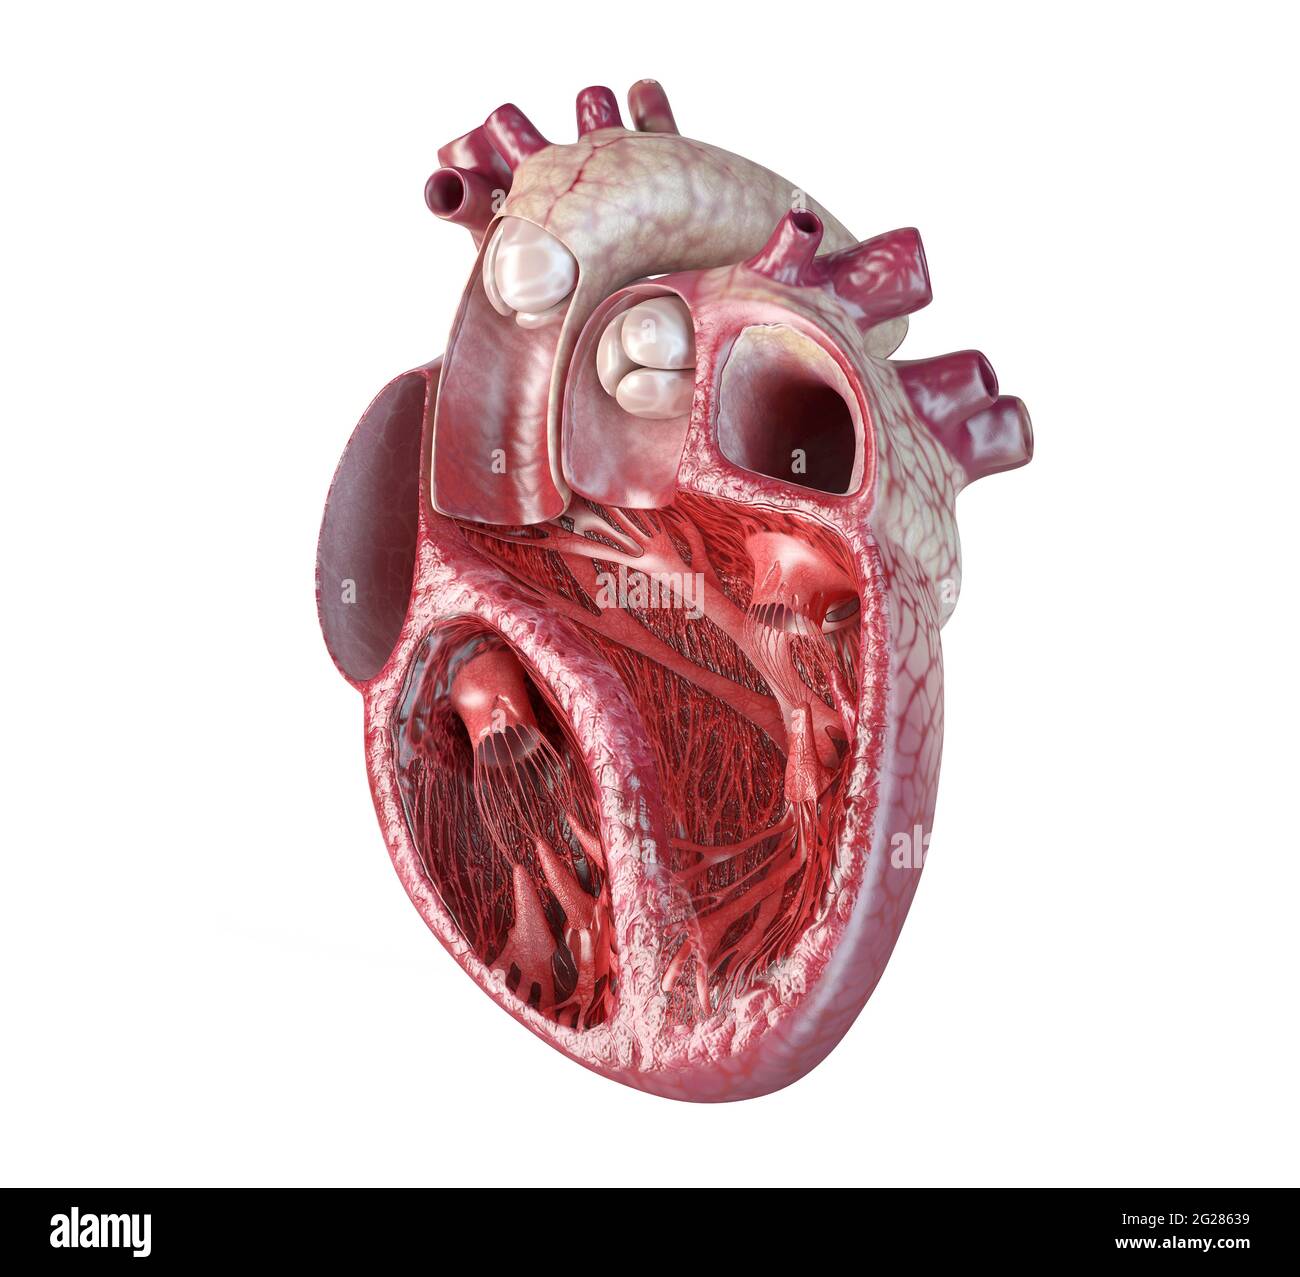 Human heart cross-section with detailed internal structure. Stock Photo